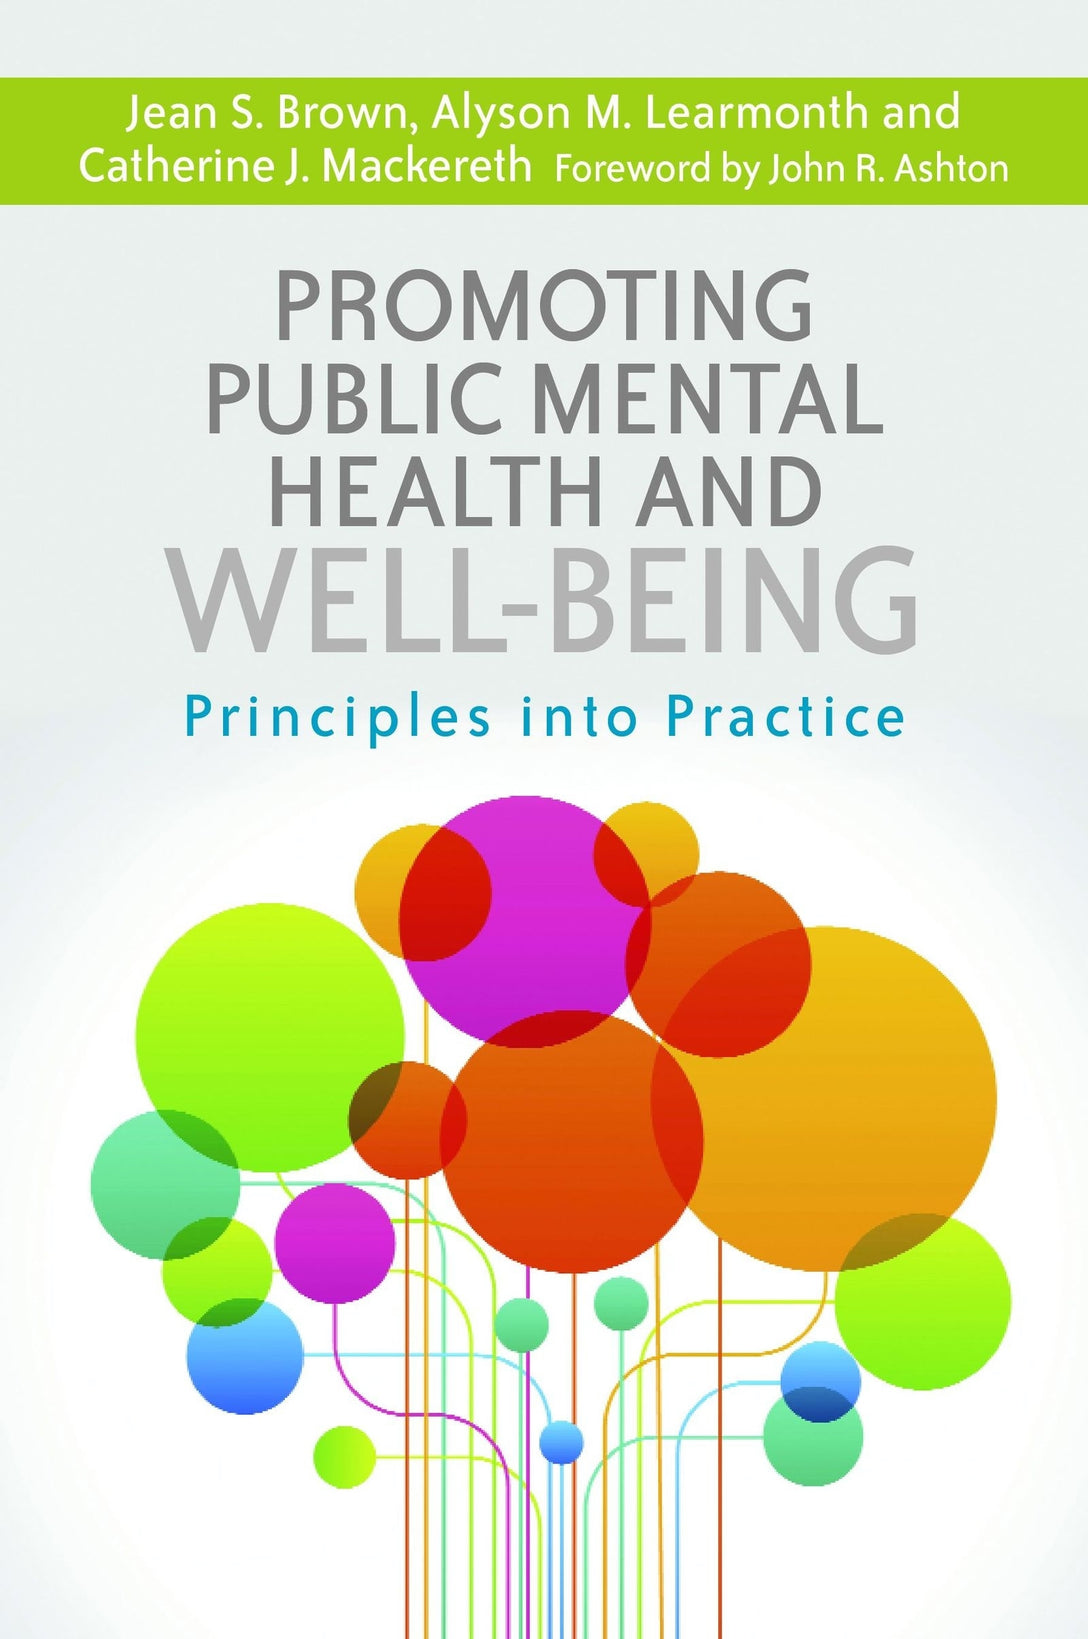 Promoting Public Mental Health and Well-being by Alyson M. Learmonth, Catherine J. Mackereth, Jean S. Brown, John R. Ashton